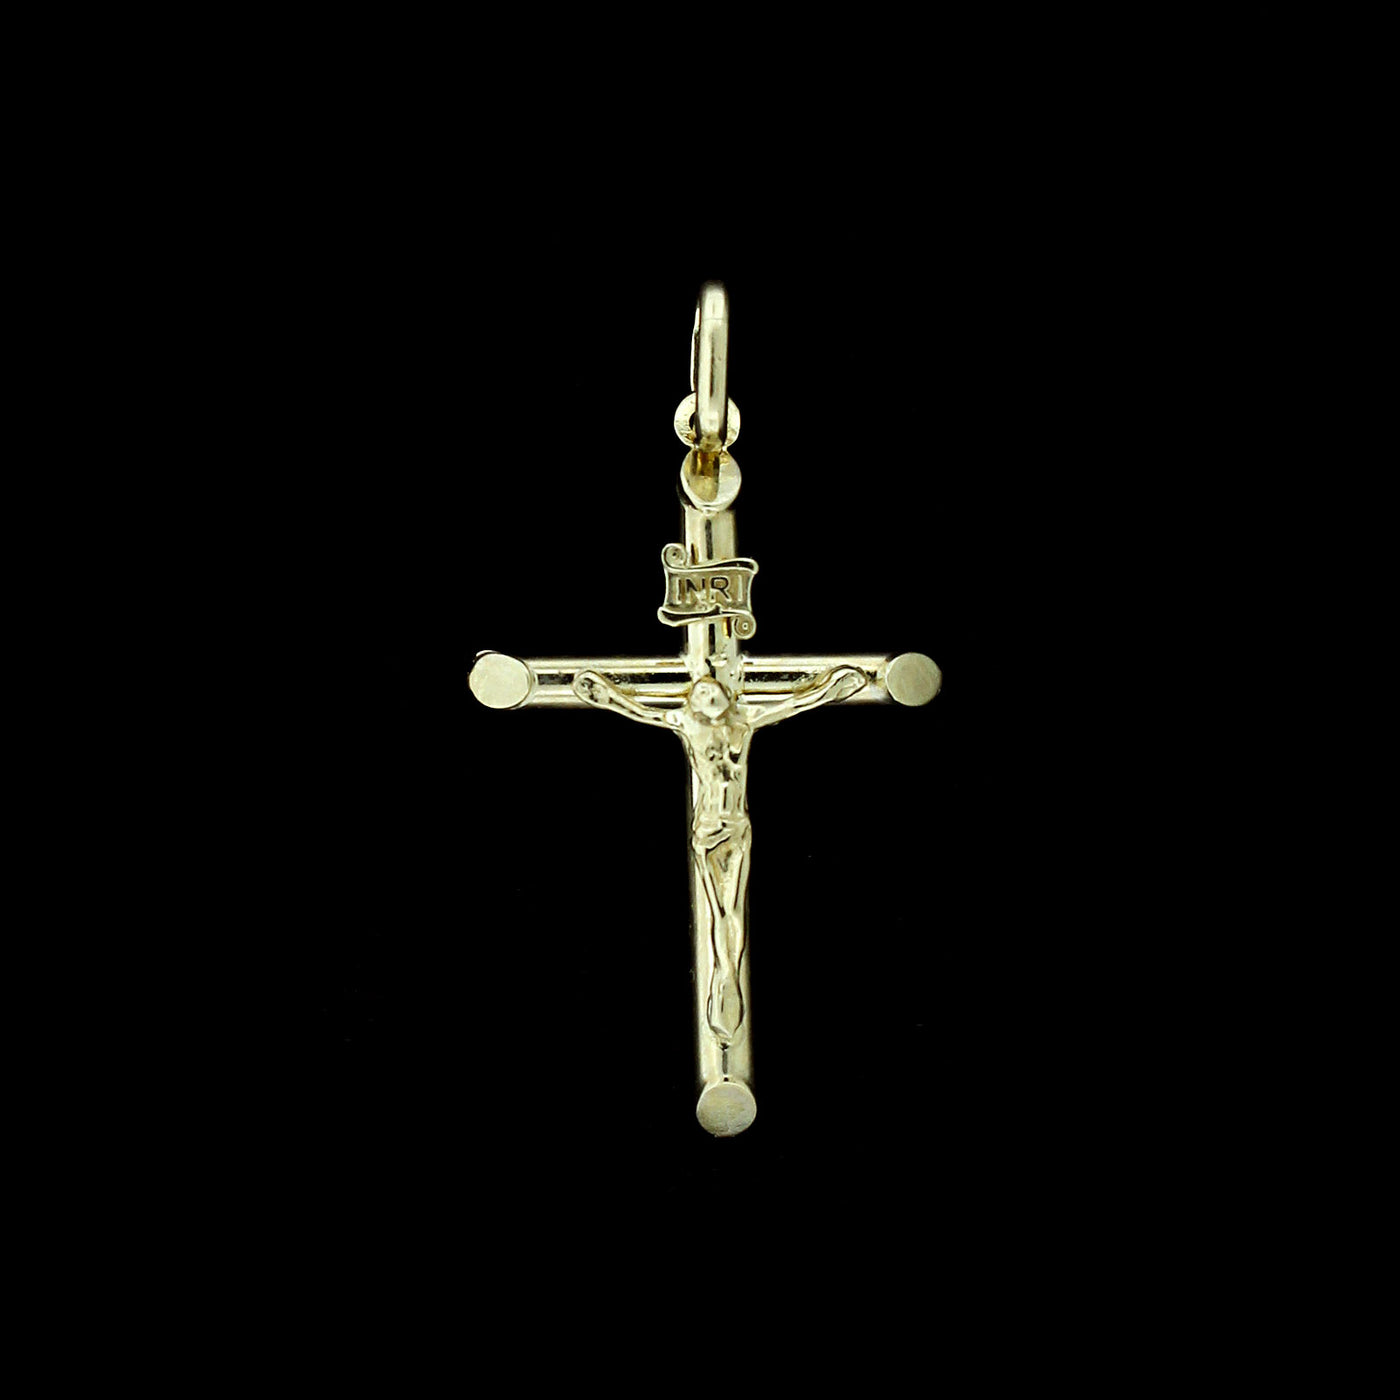 Real 10K Yellow Gold INRI Jesus Crucifix Cross Charm Pendant & 2.5mm Rope Chain Necklace Set